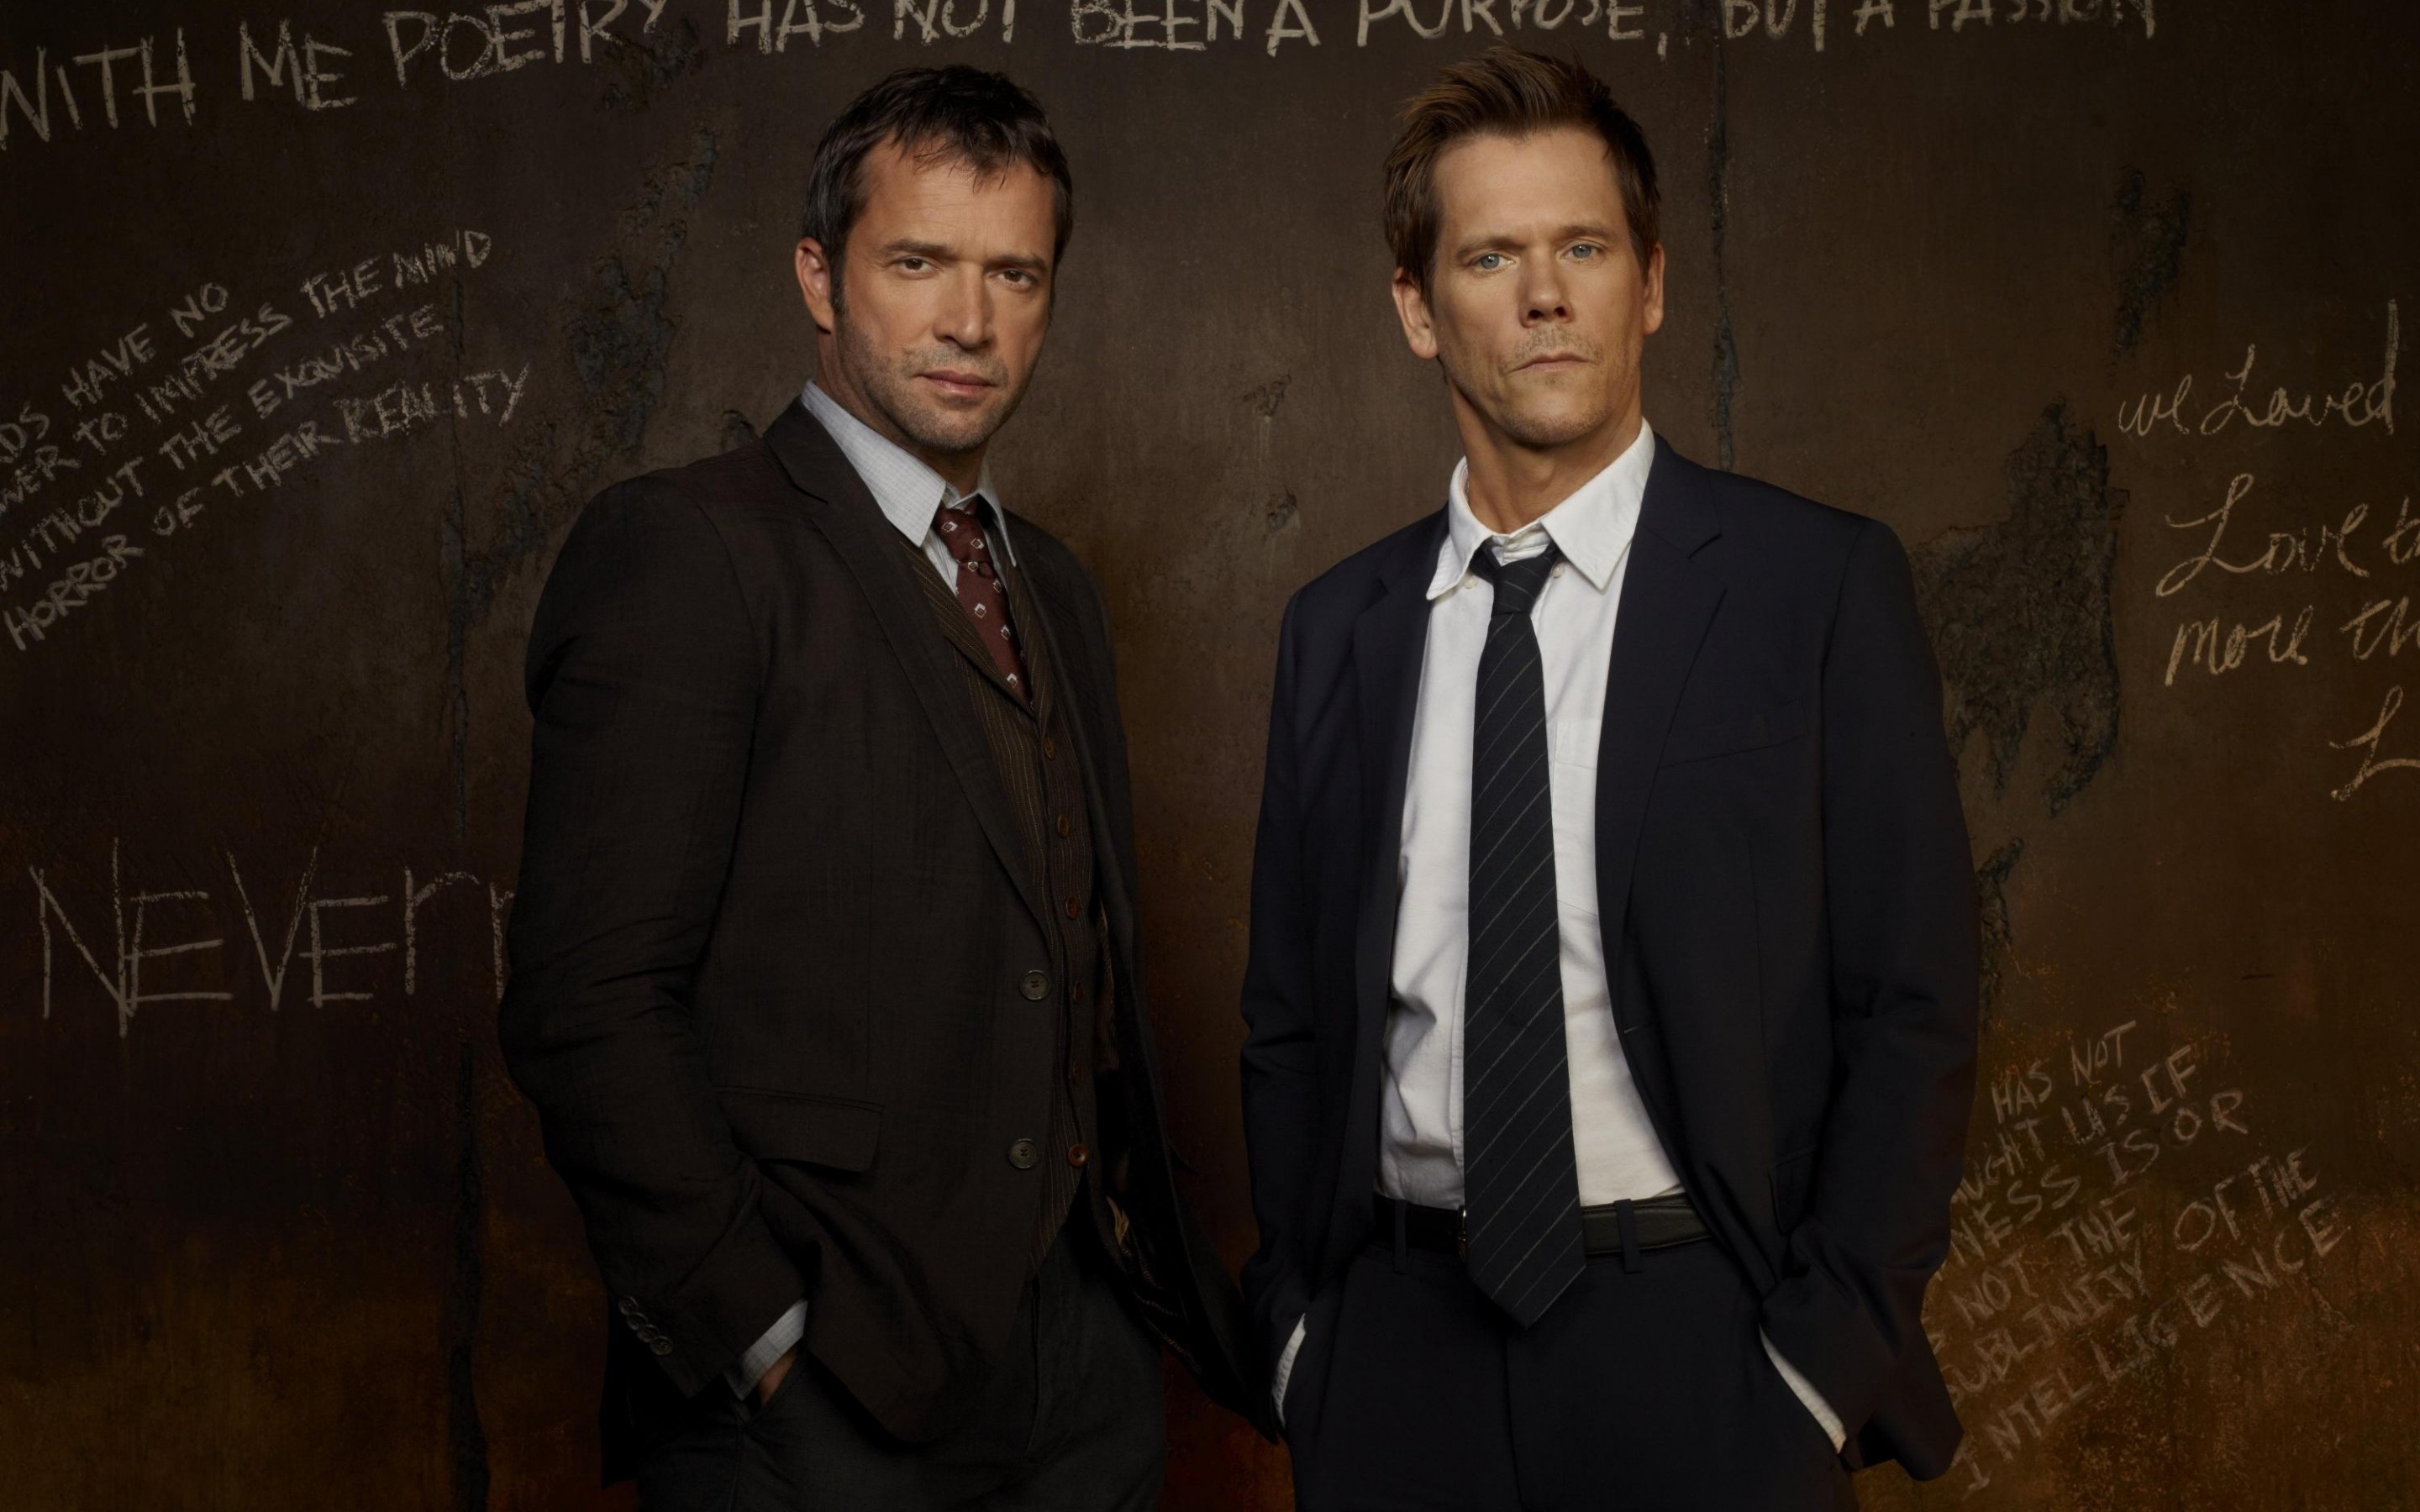 Kevin Bacon and James Purefoy for 2880 x 1800 Retina Display resolution